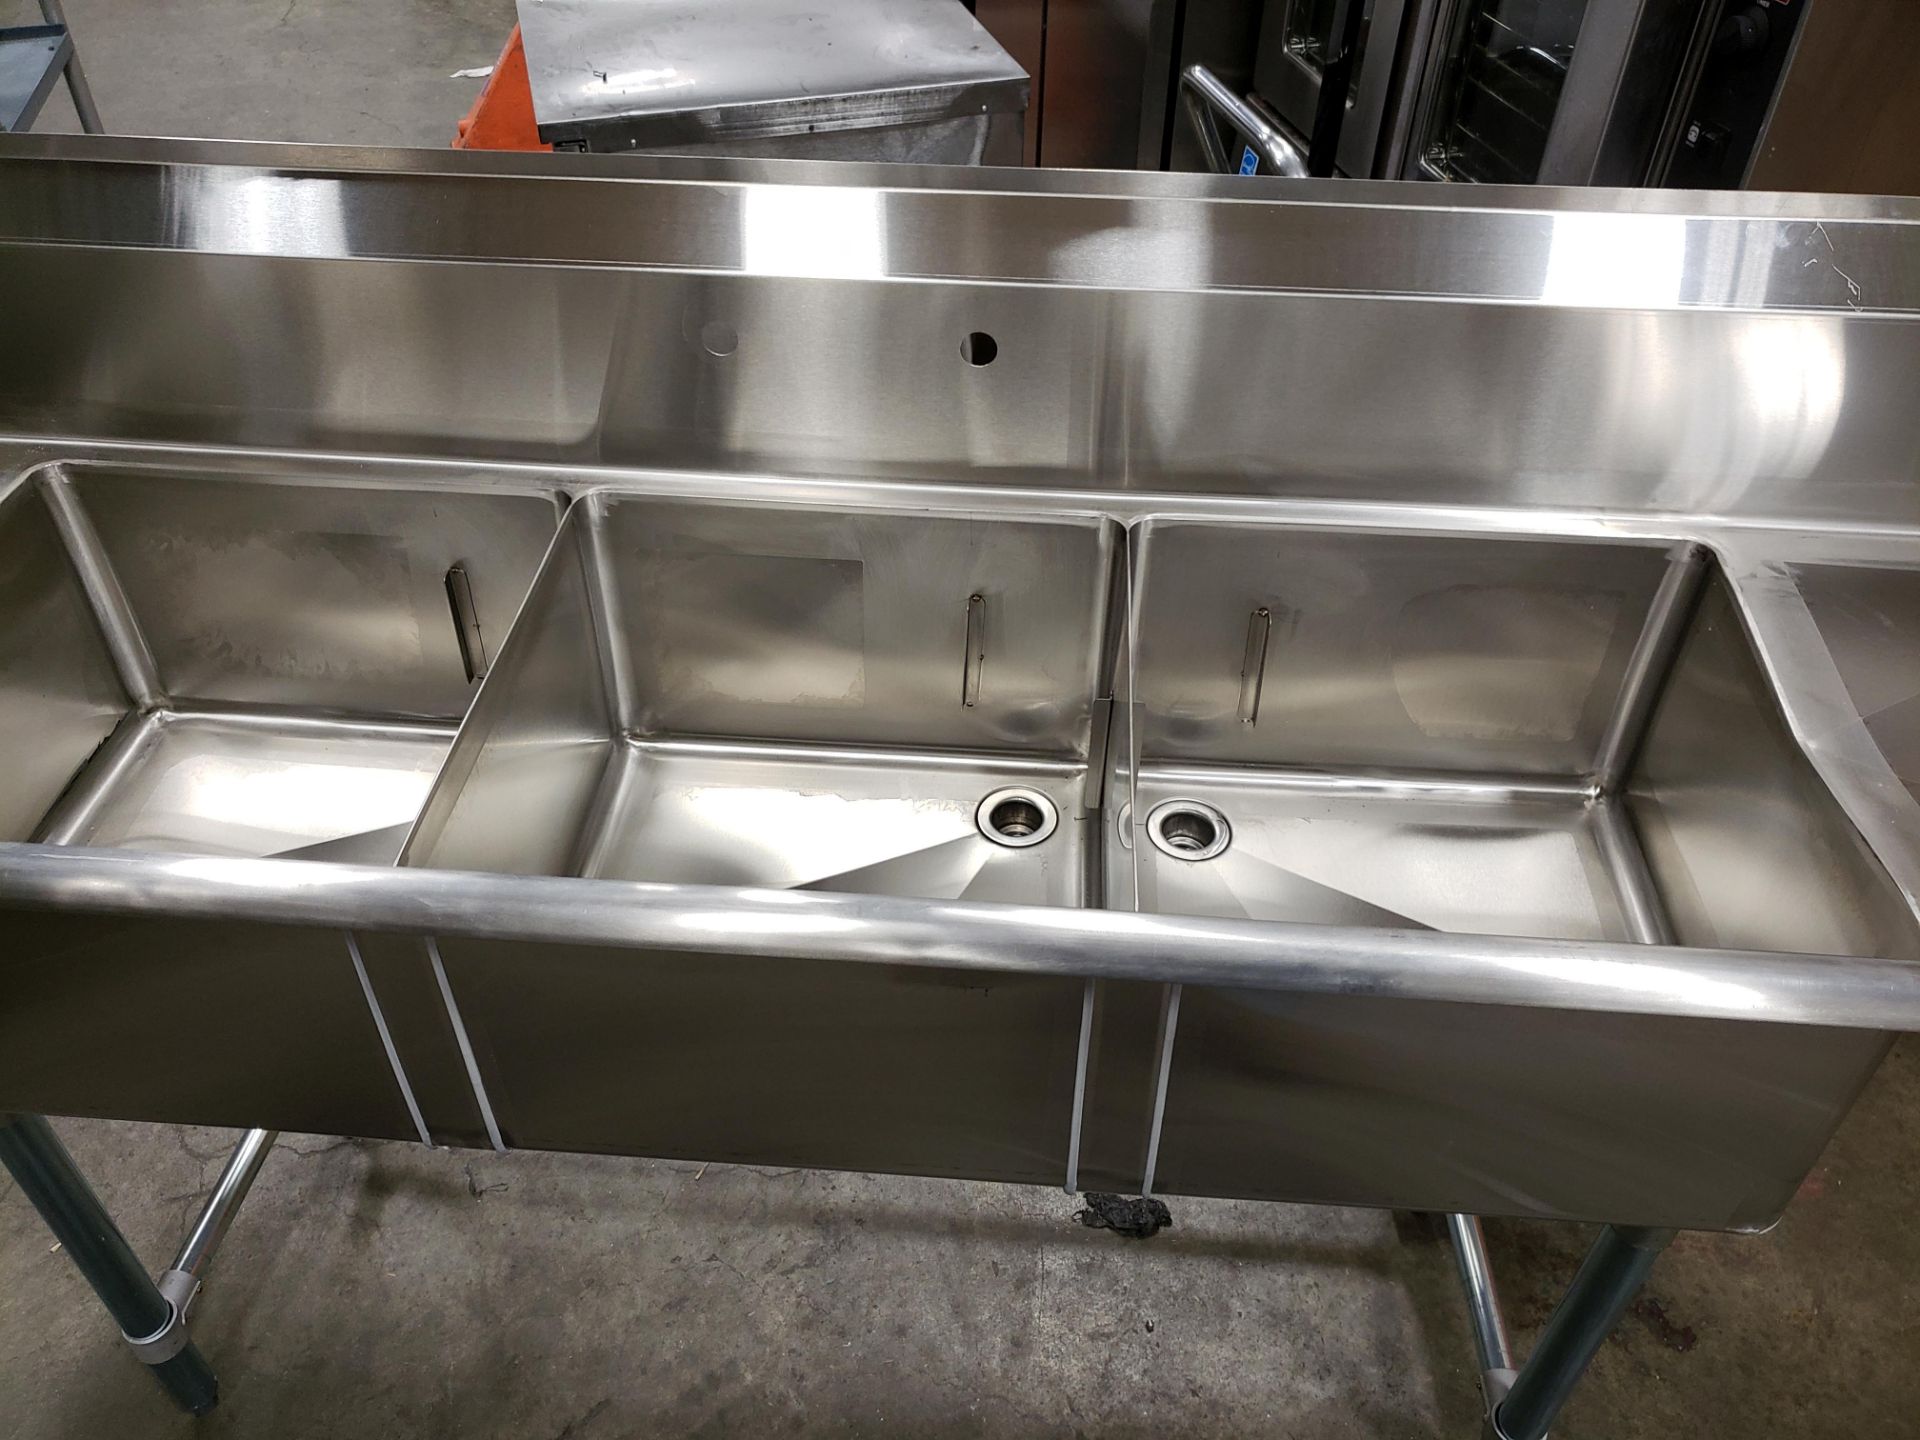 Corner Drain Triple Two Drainboard Sink, Overall Dims 90” x 23.5” x 44” - Image 2 of 4